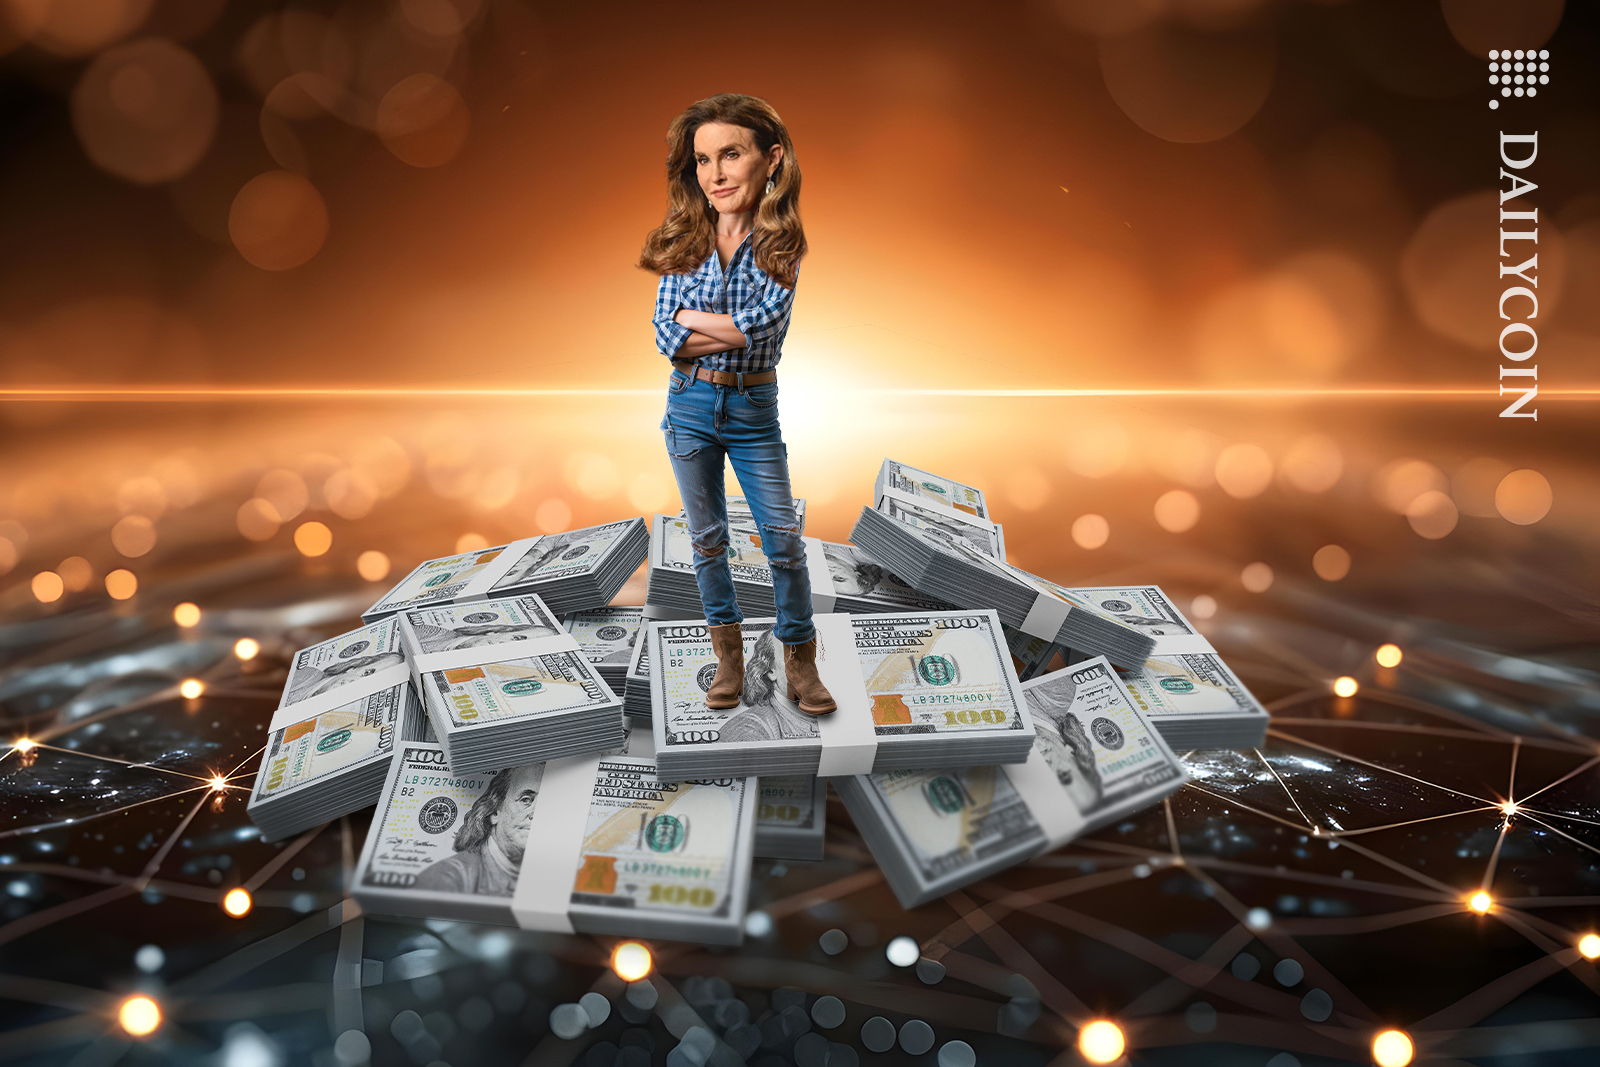 Caitlyn Jenner standing on top of cash pile on defi land.